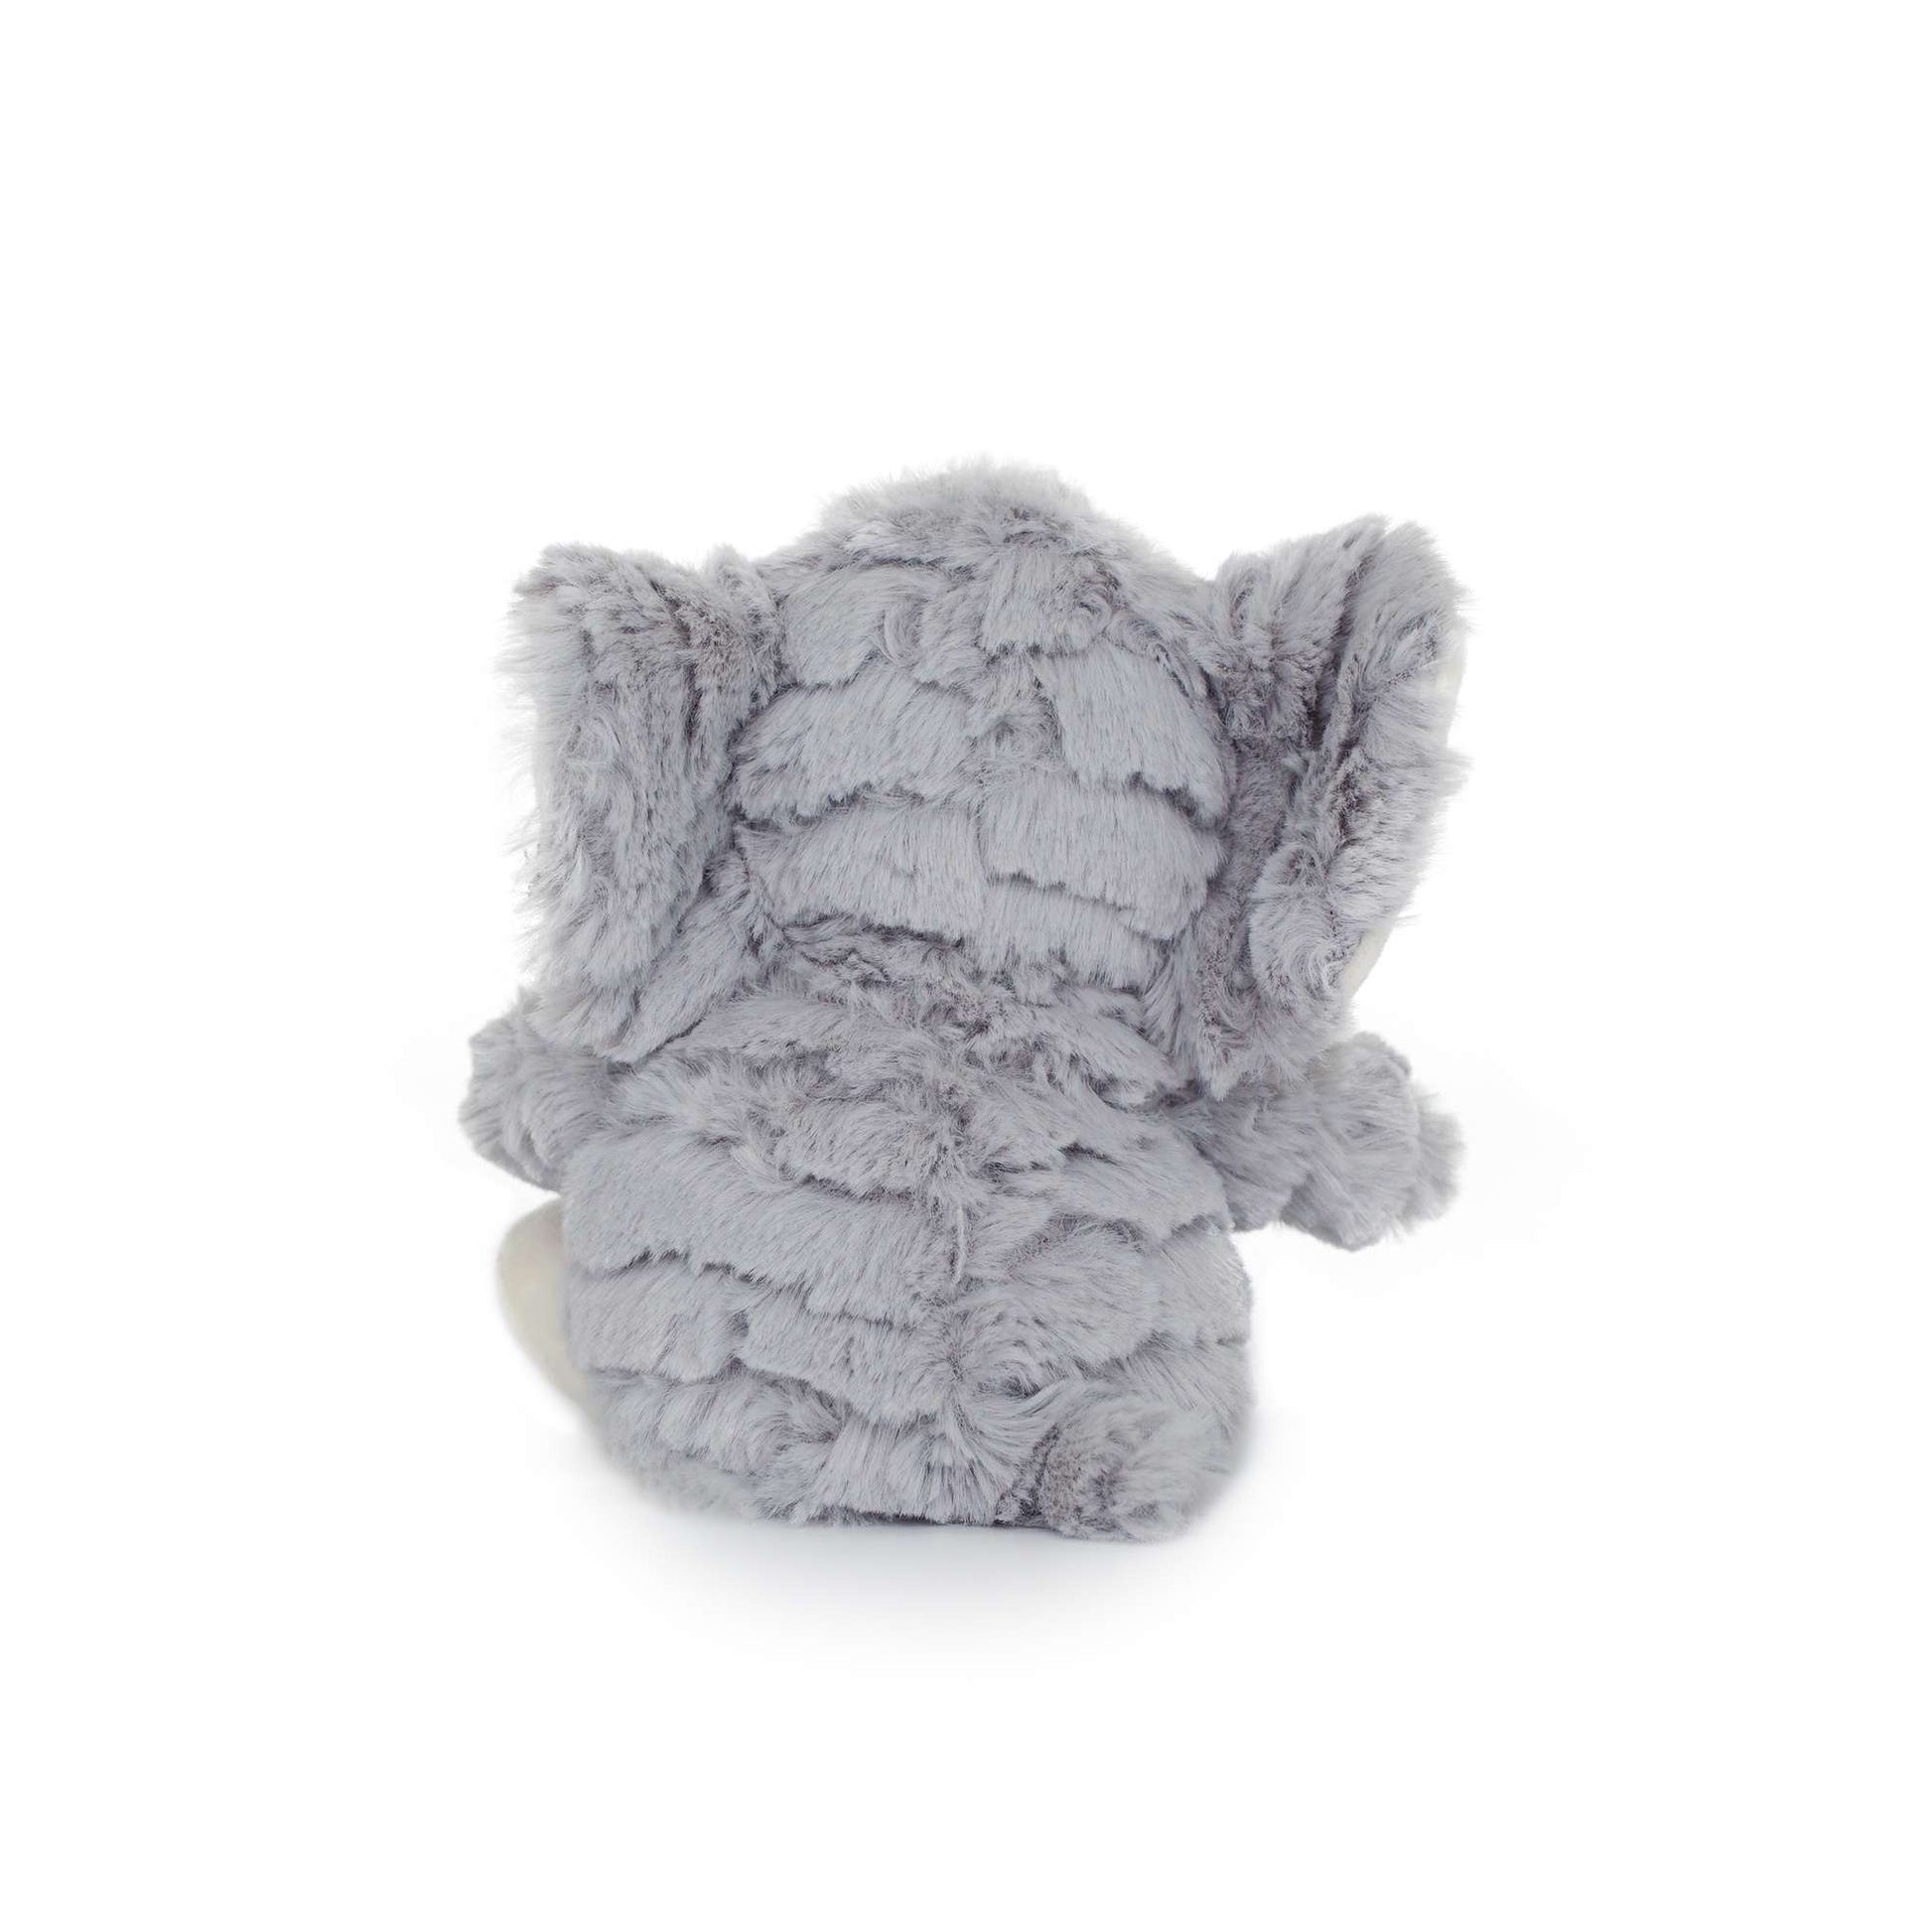 Baby elephant adorable back view stuffed animal PlushThis